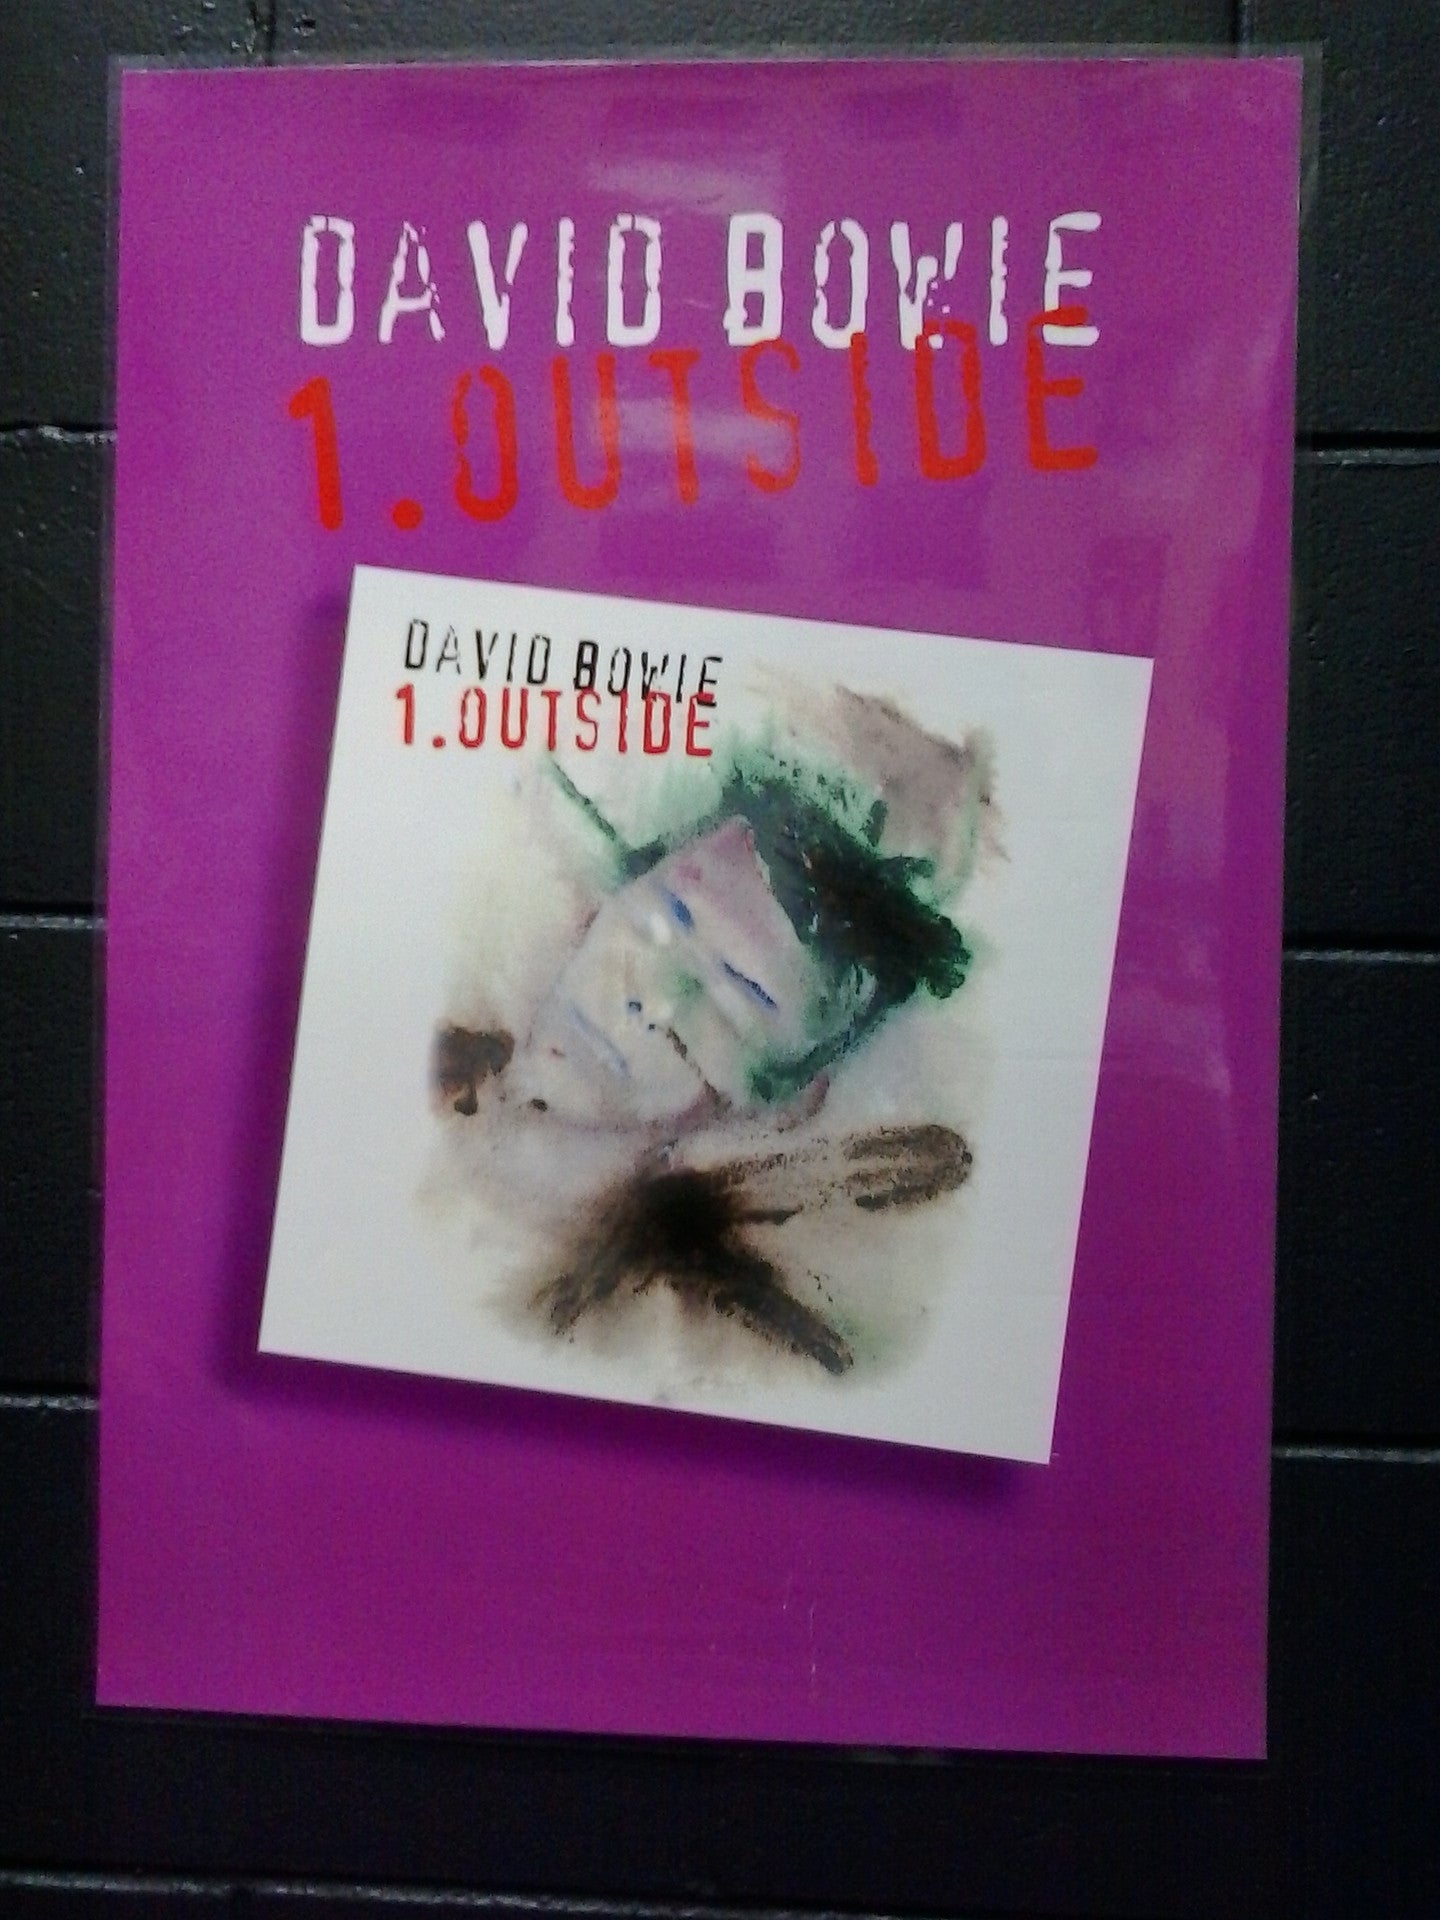 BOWIE DAVID-OUTSIDE PROMO POSTER